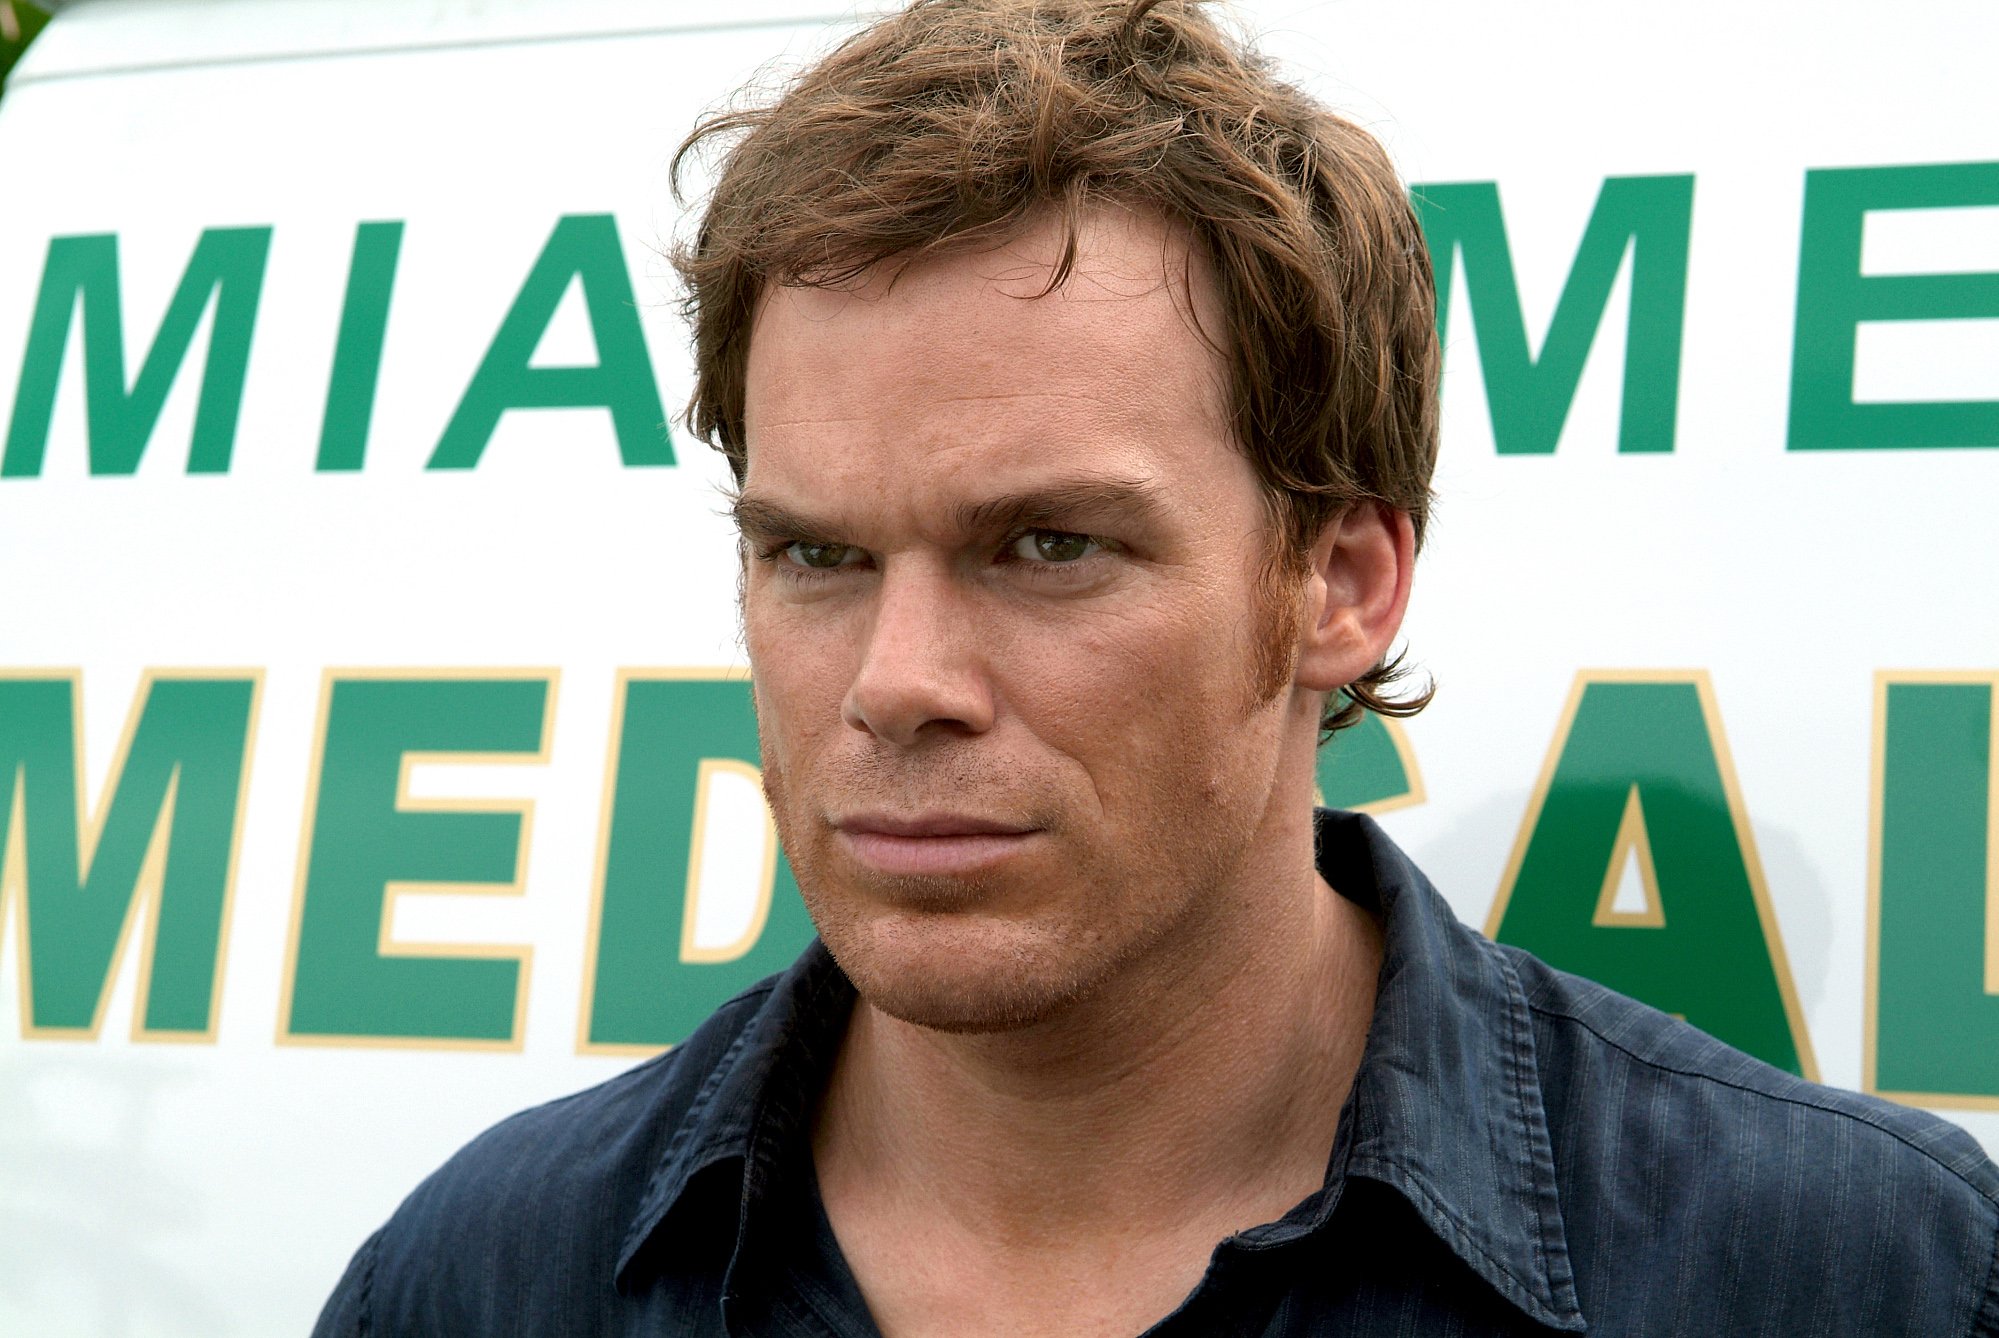 Michael C. Hall as Dexter Morgan in 'Dexter.' Hall will return for the revival, Dexter: New Blood.